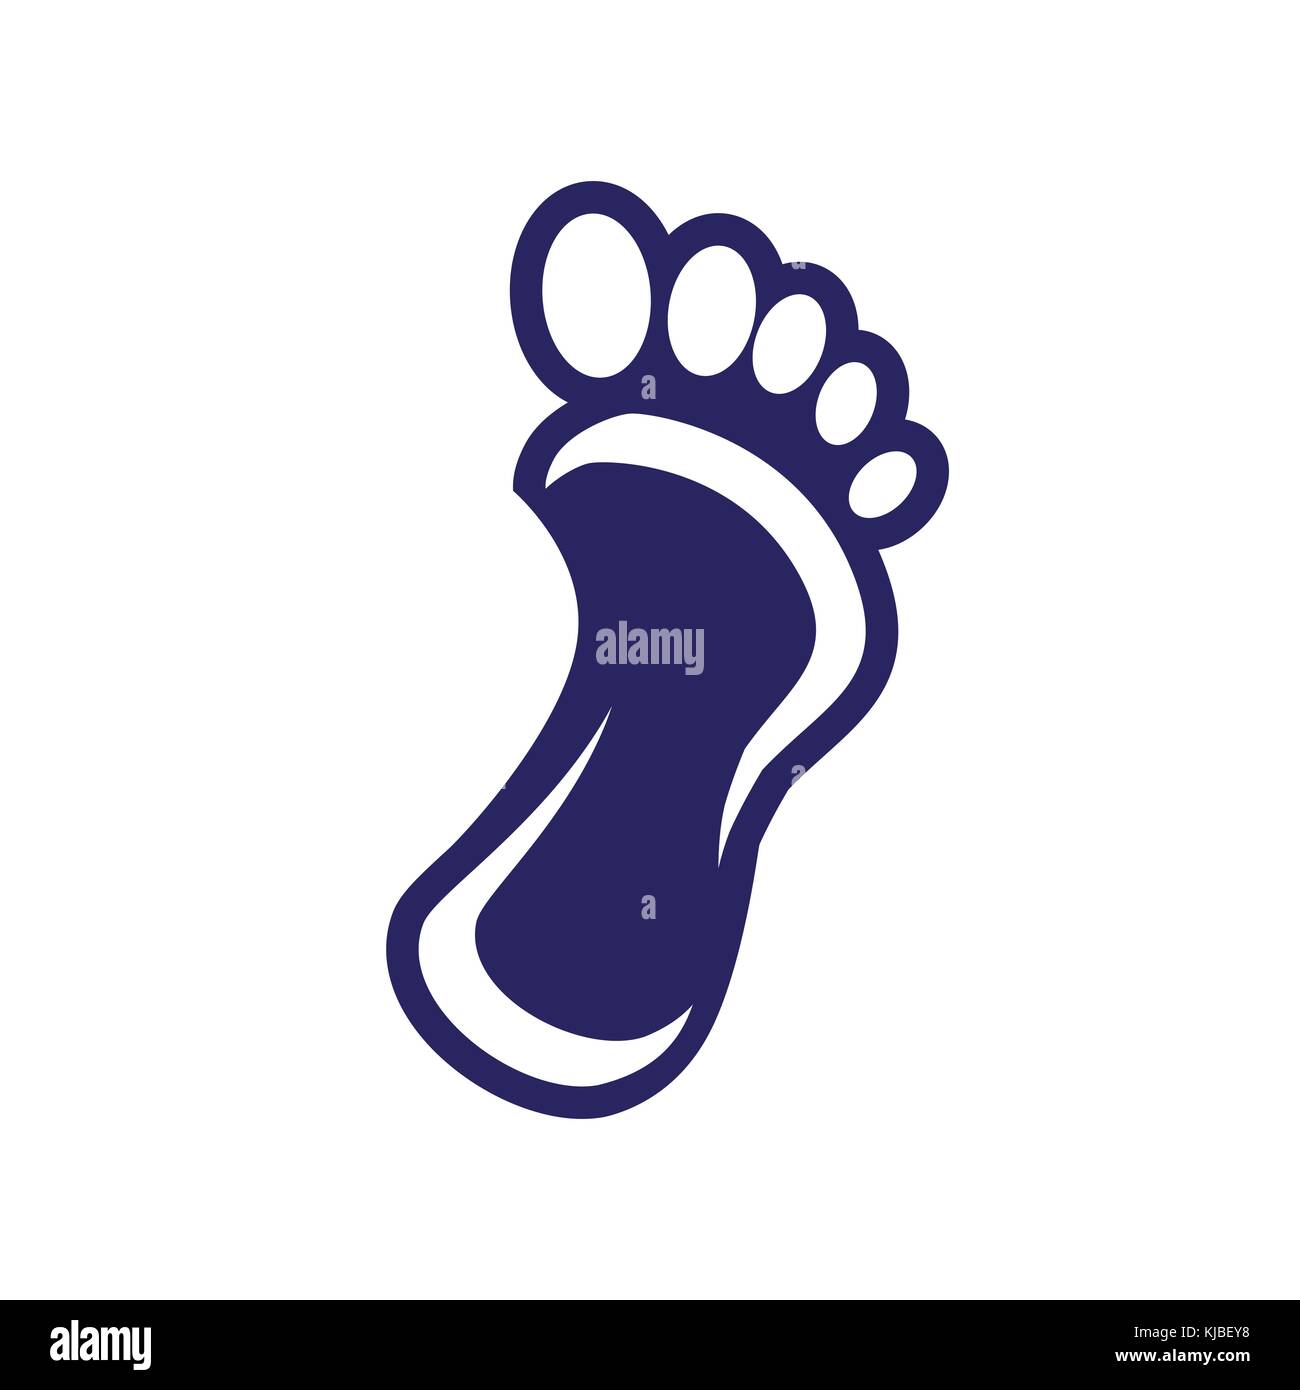 footprint symbol, footprint illustration, bold foot print, icon design, isolated on white background. Stock Vector